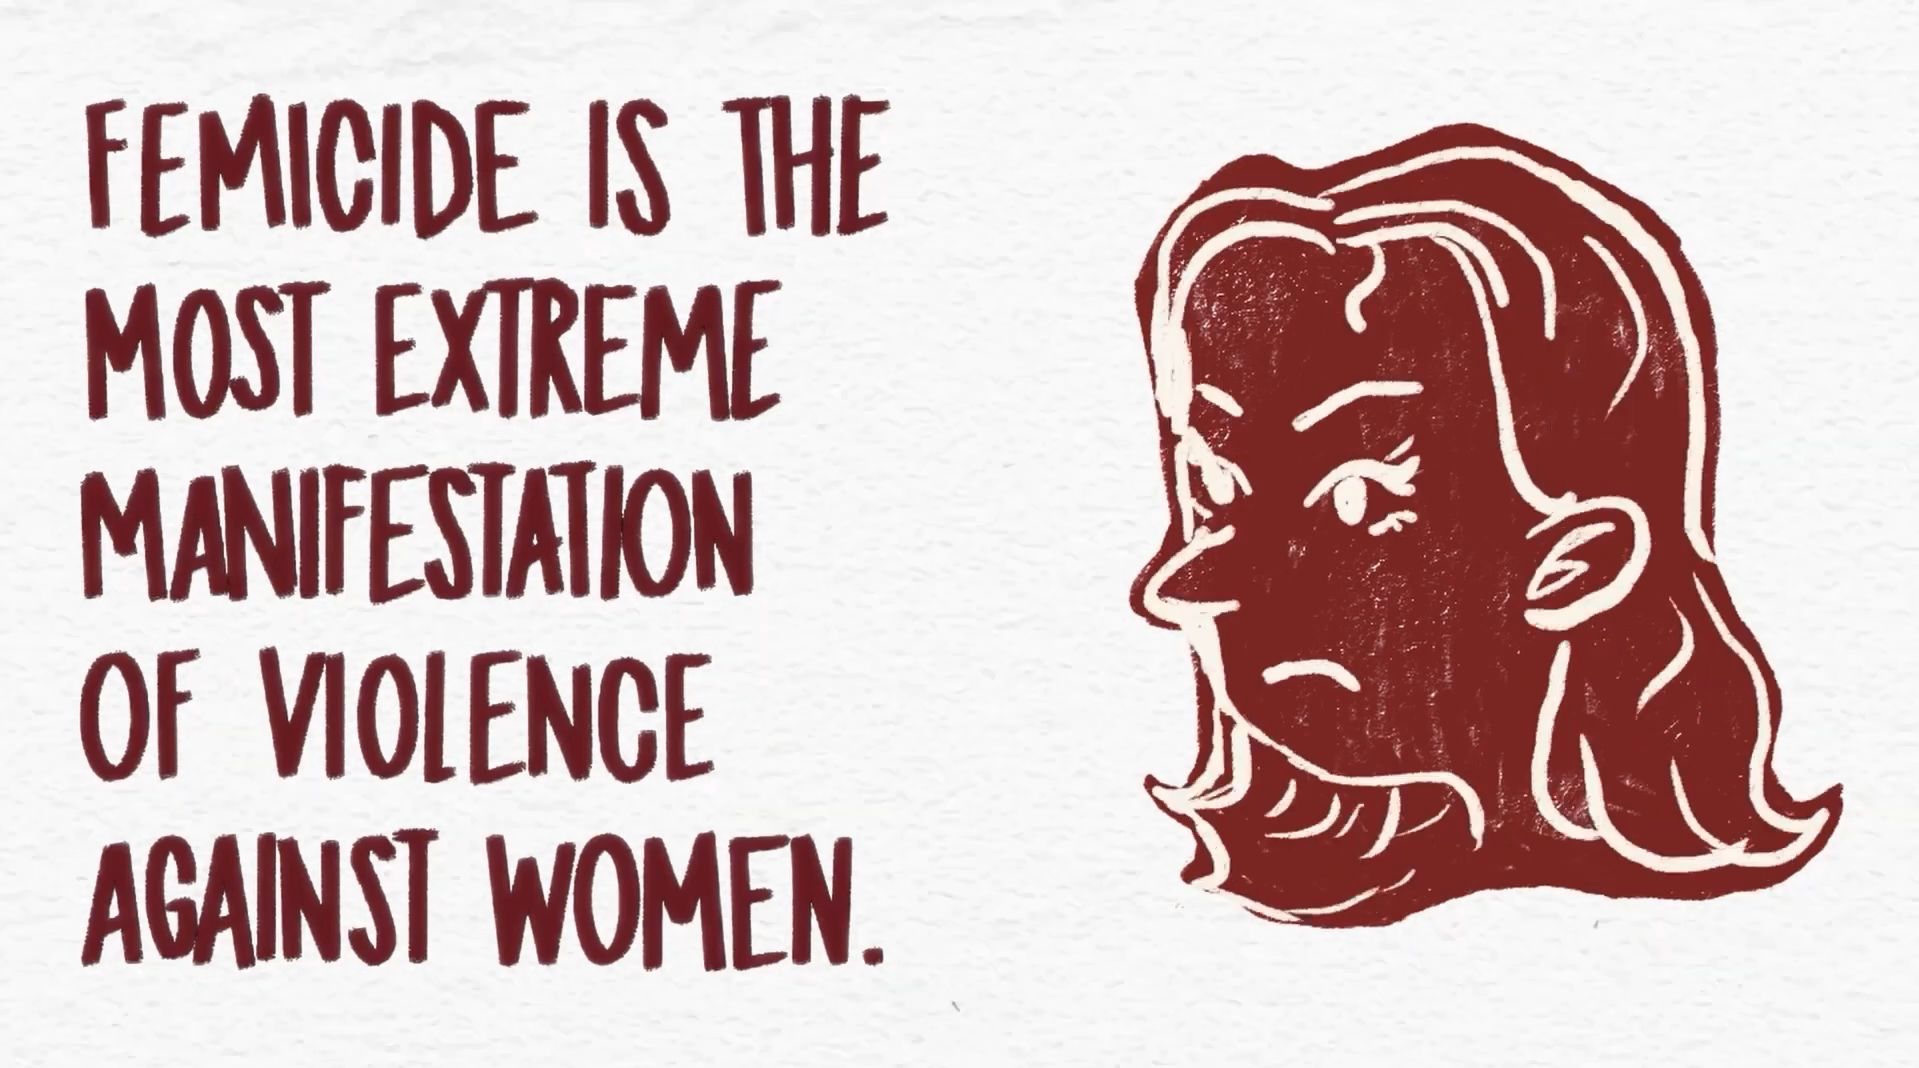 Countries across Europe take first steps to address femicide UN Women